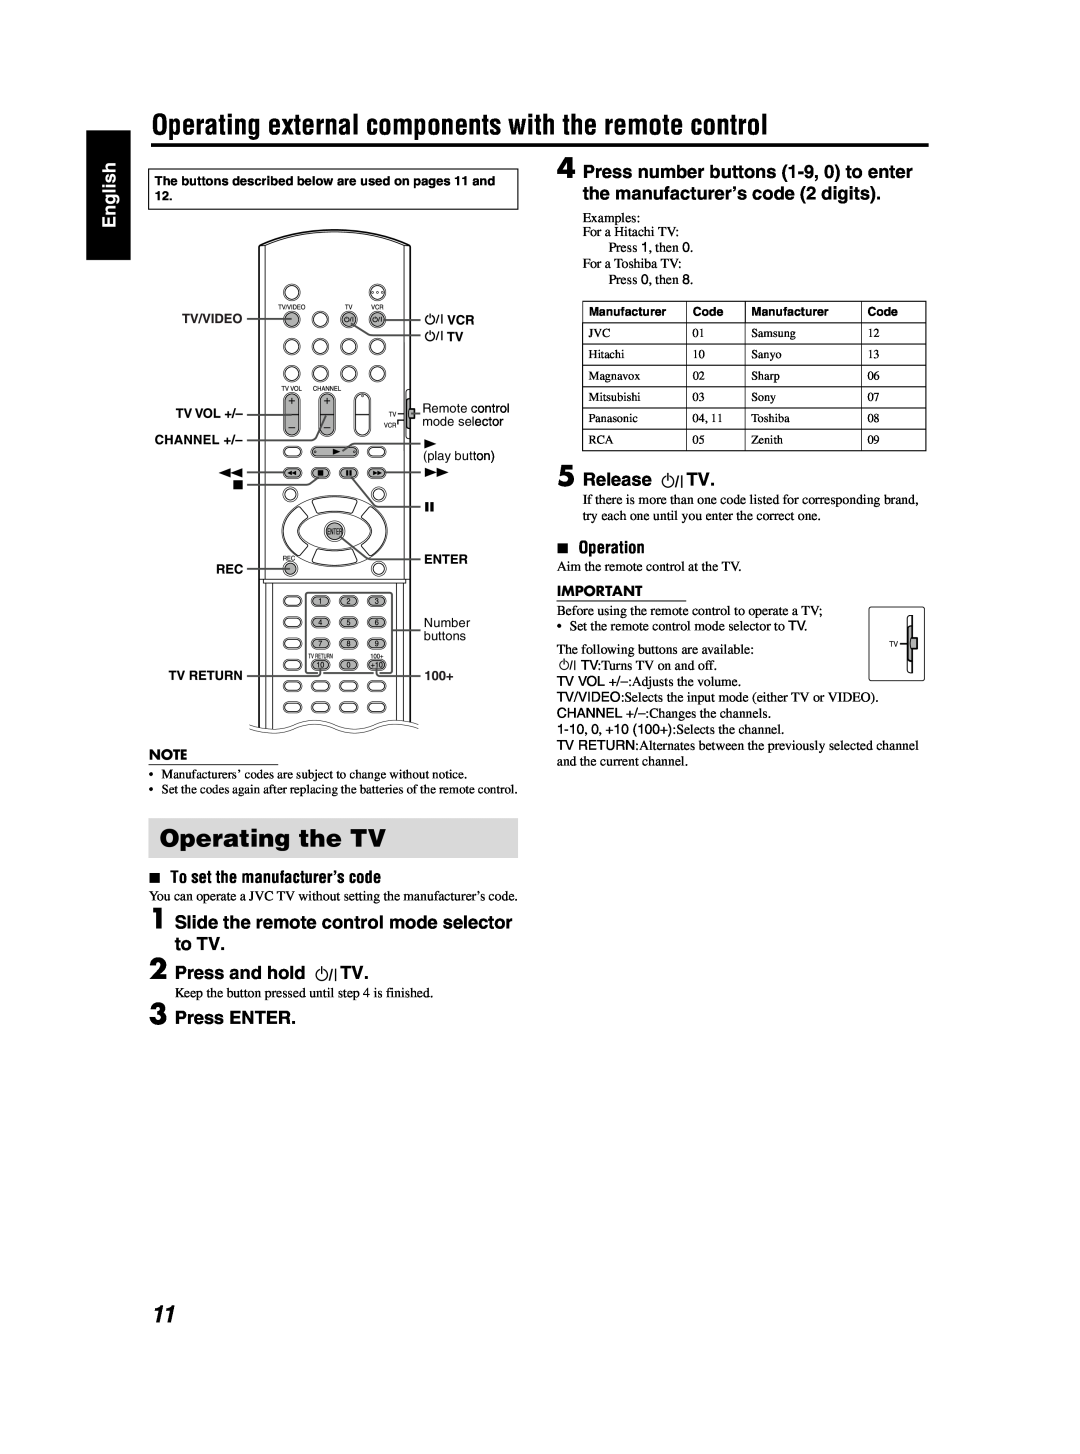 JVC TH-S3 TH-S2 Operating the TV, Slide the remote control mode selector to TV, Press and hold TV, Press ENTER, Release TV 